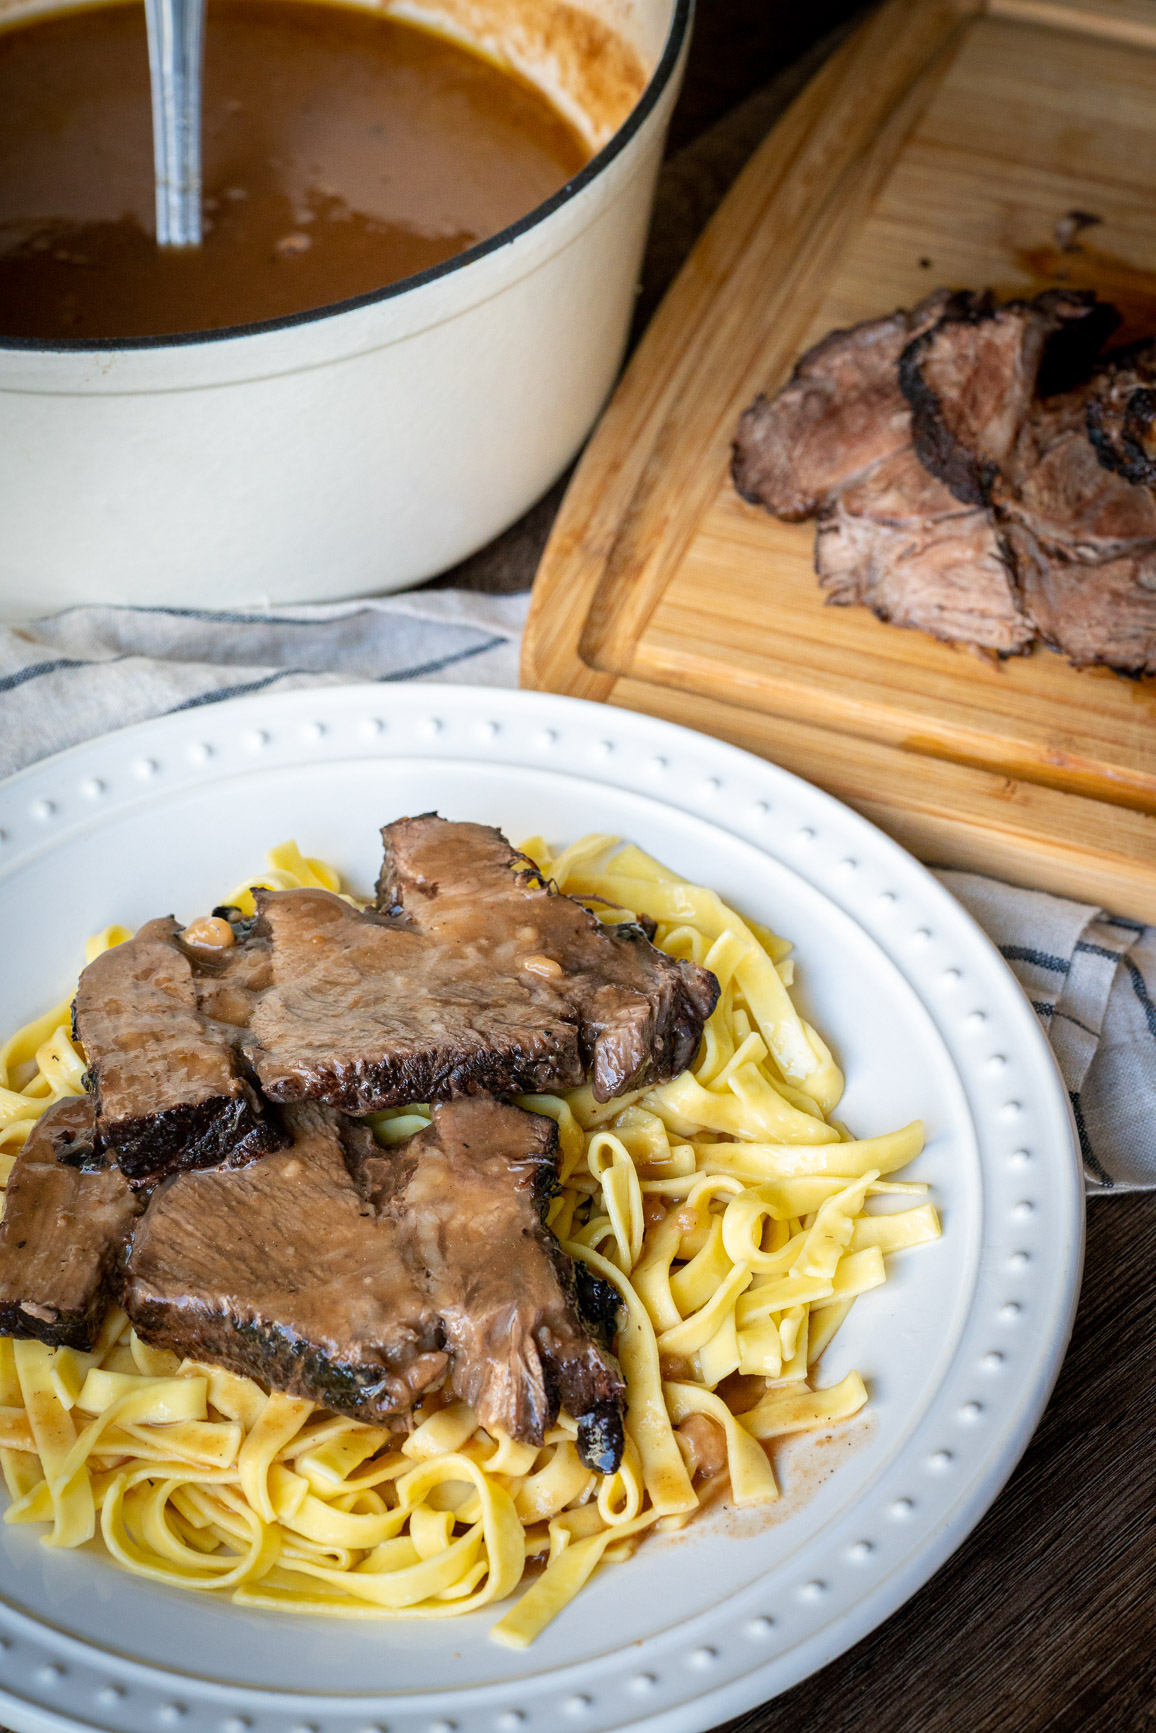 Sauerbraten with noodles